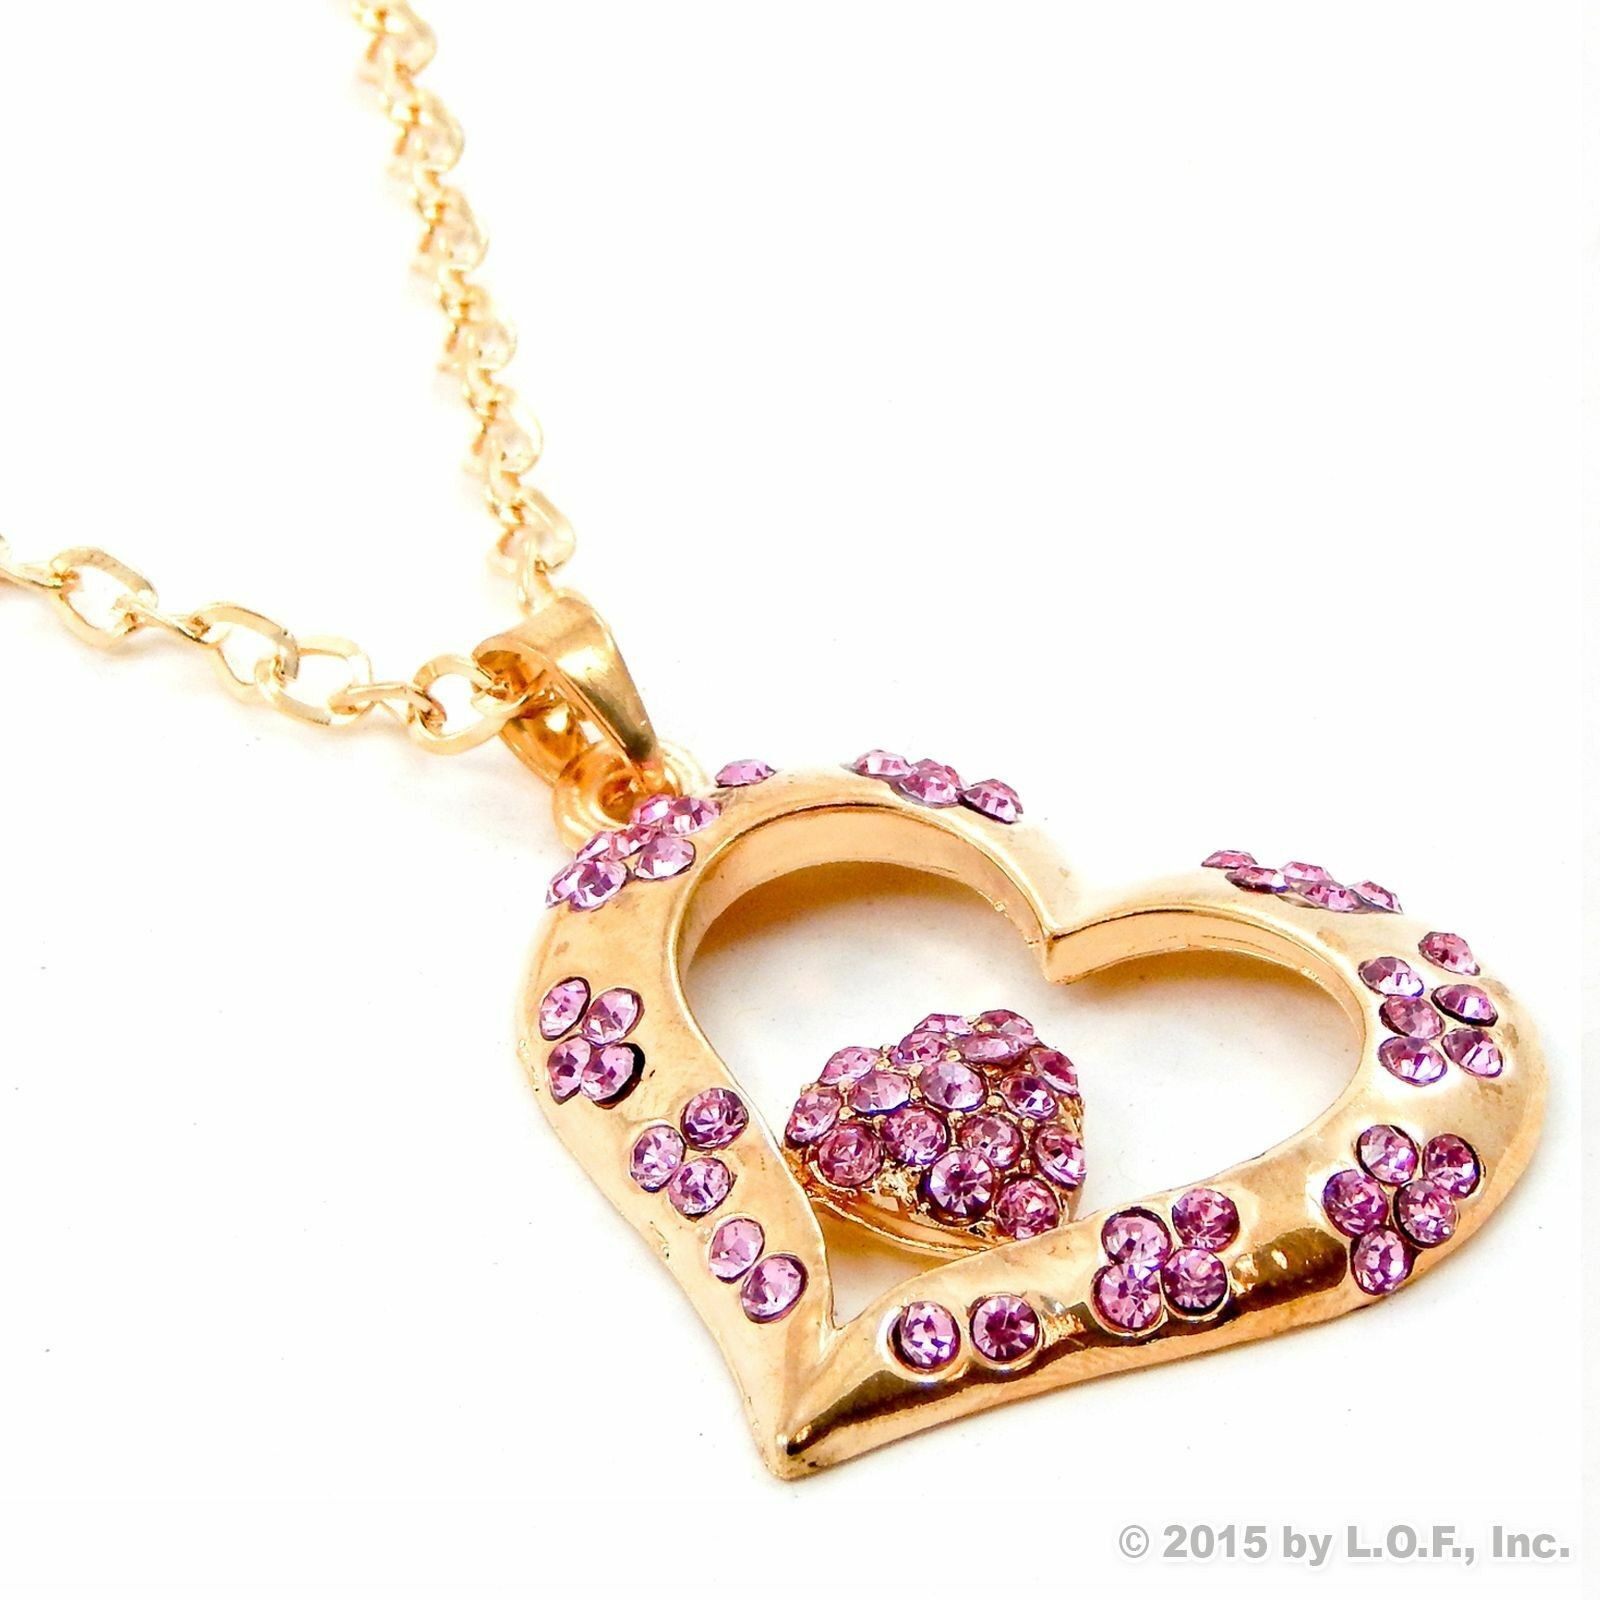 Bling Heart Rear View Mirror Hanging Car Charm Ornament Gold Pink Pendant Chain